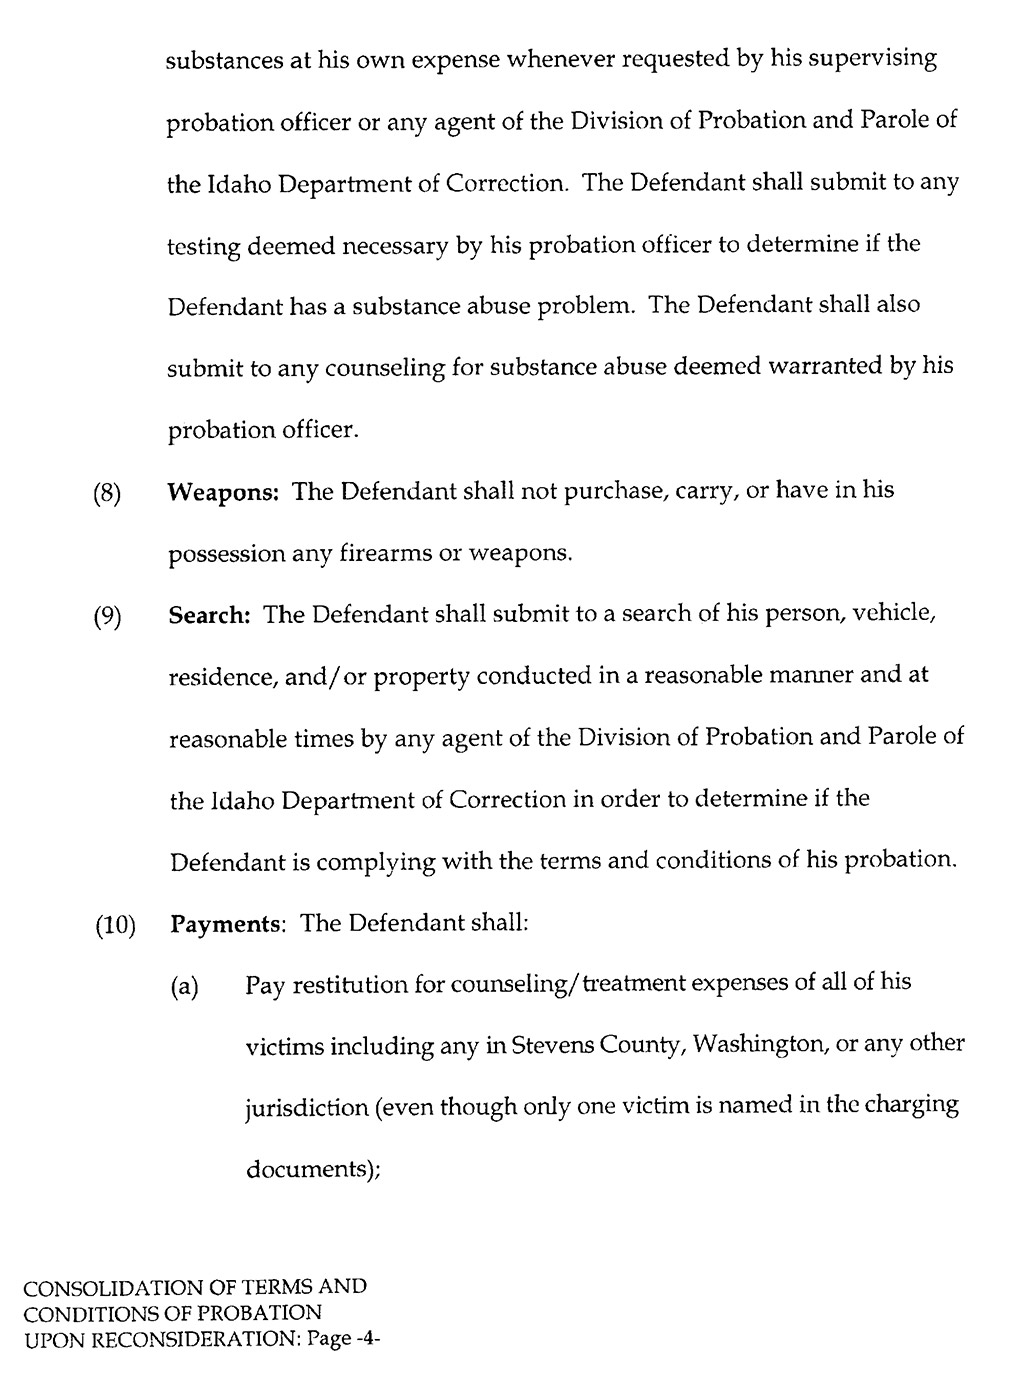 Consolidation of Terms & Conditions of Probation upon Reconsideration page 4